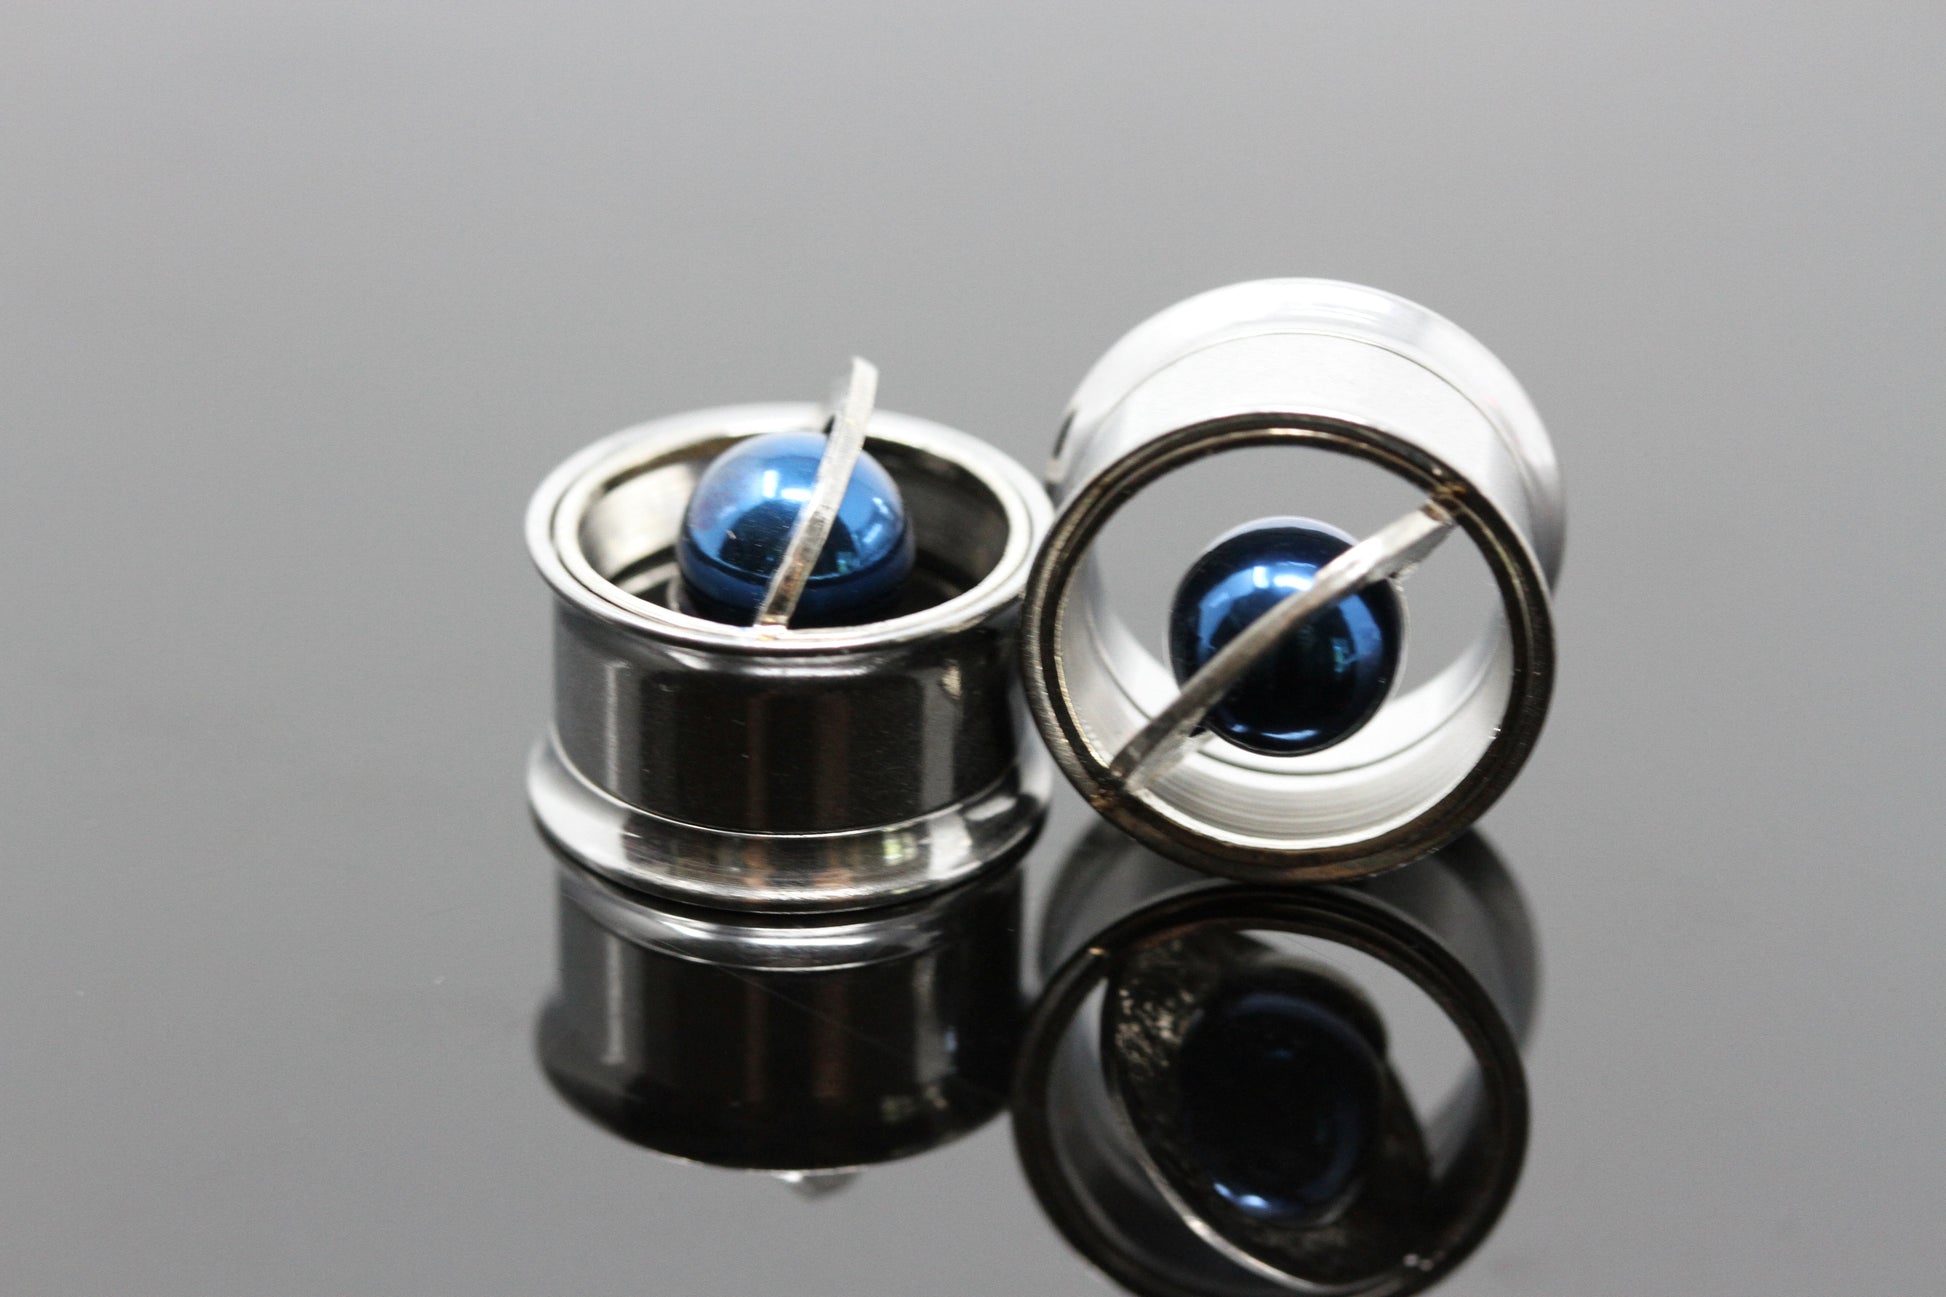 Stainless Steel Planet Tunnel Plugs